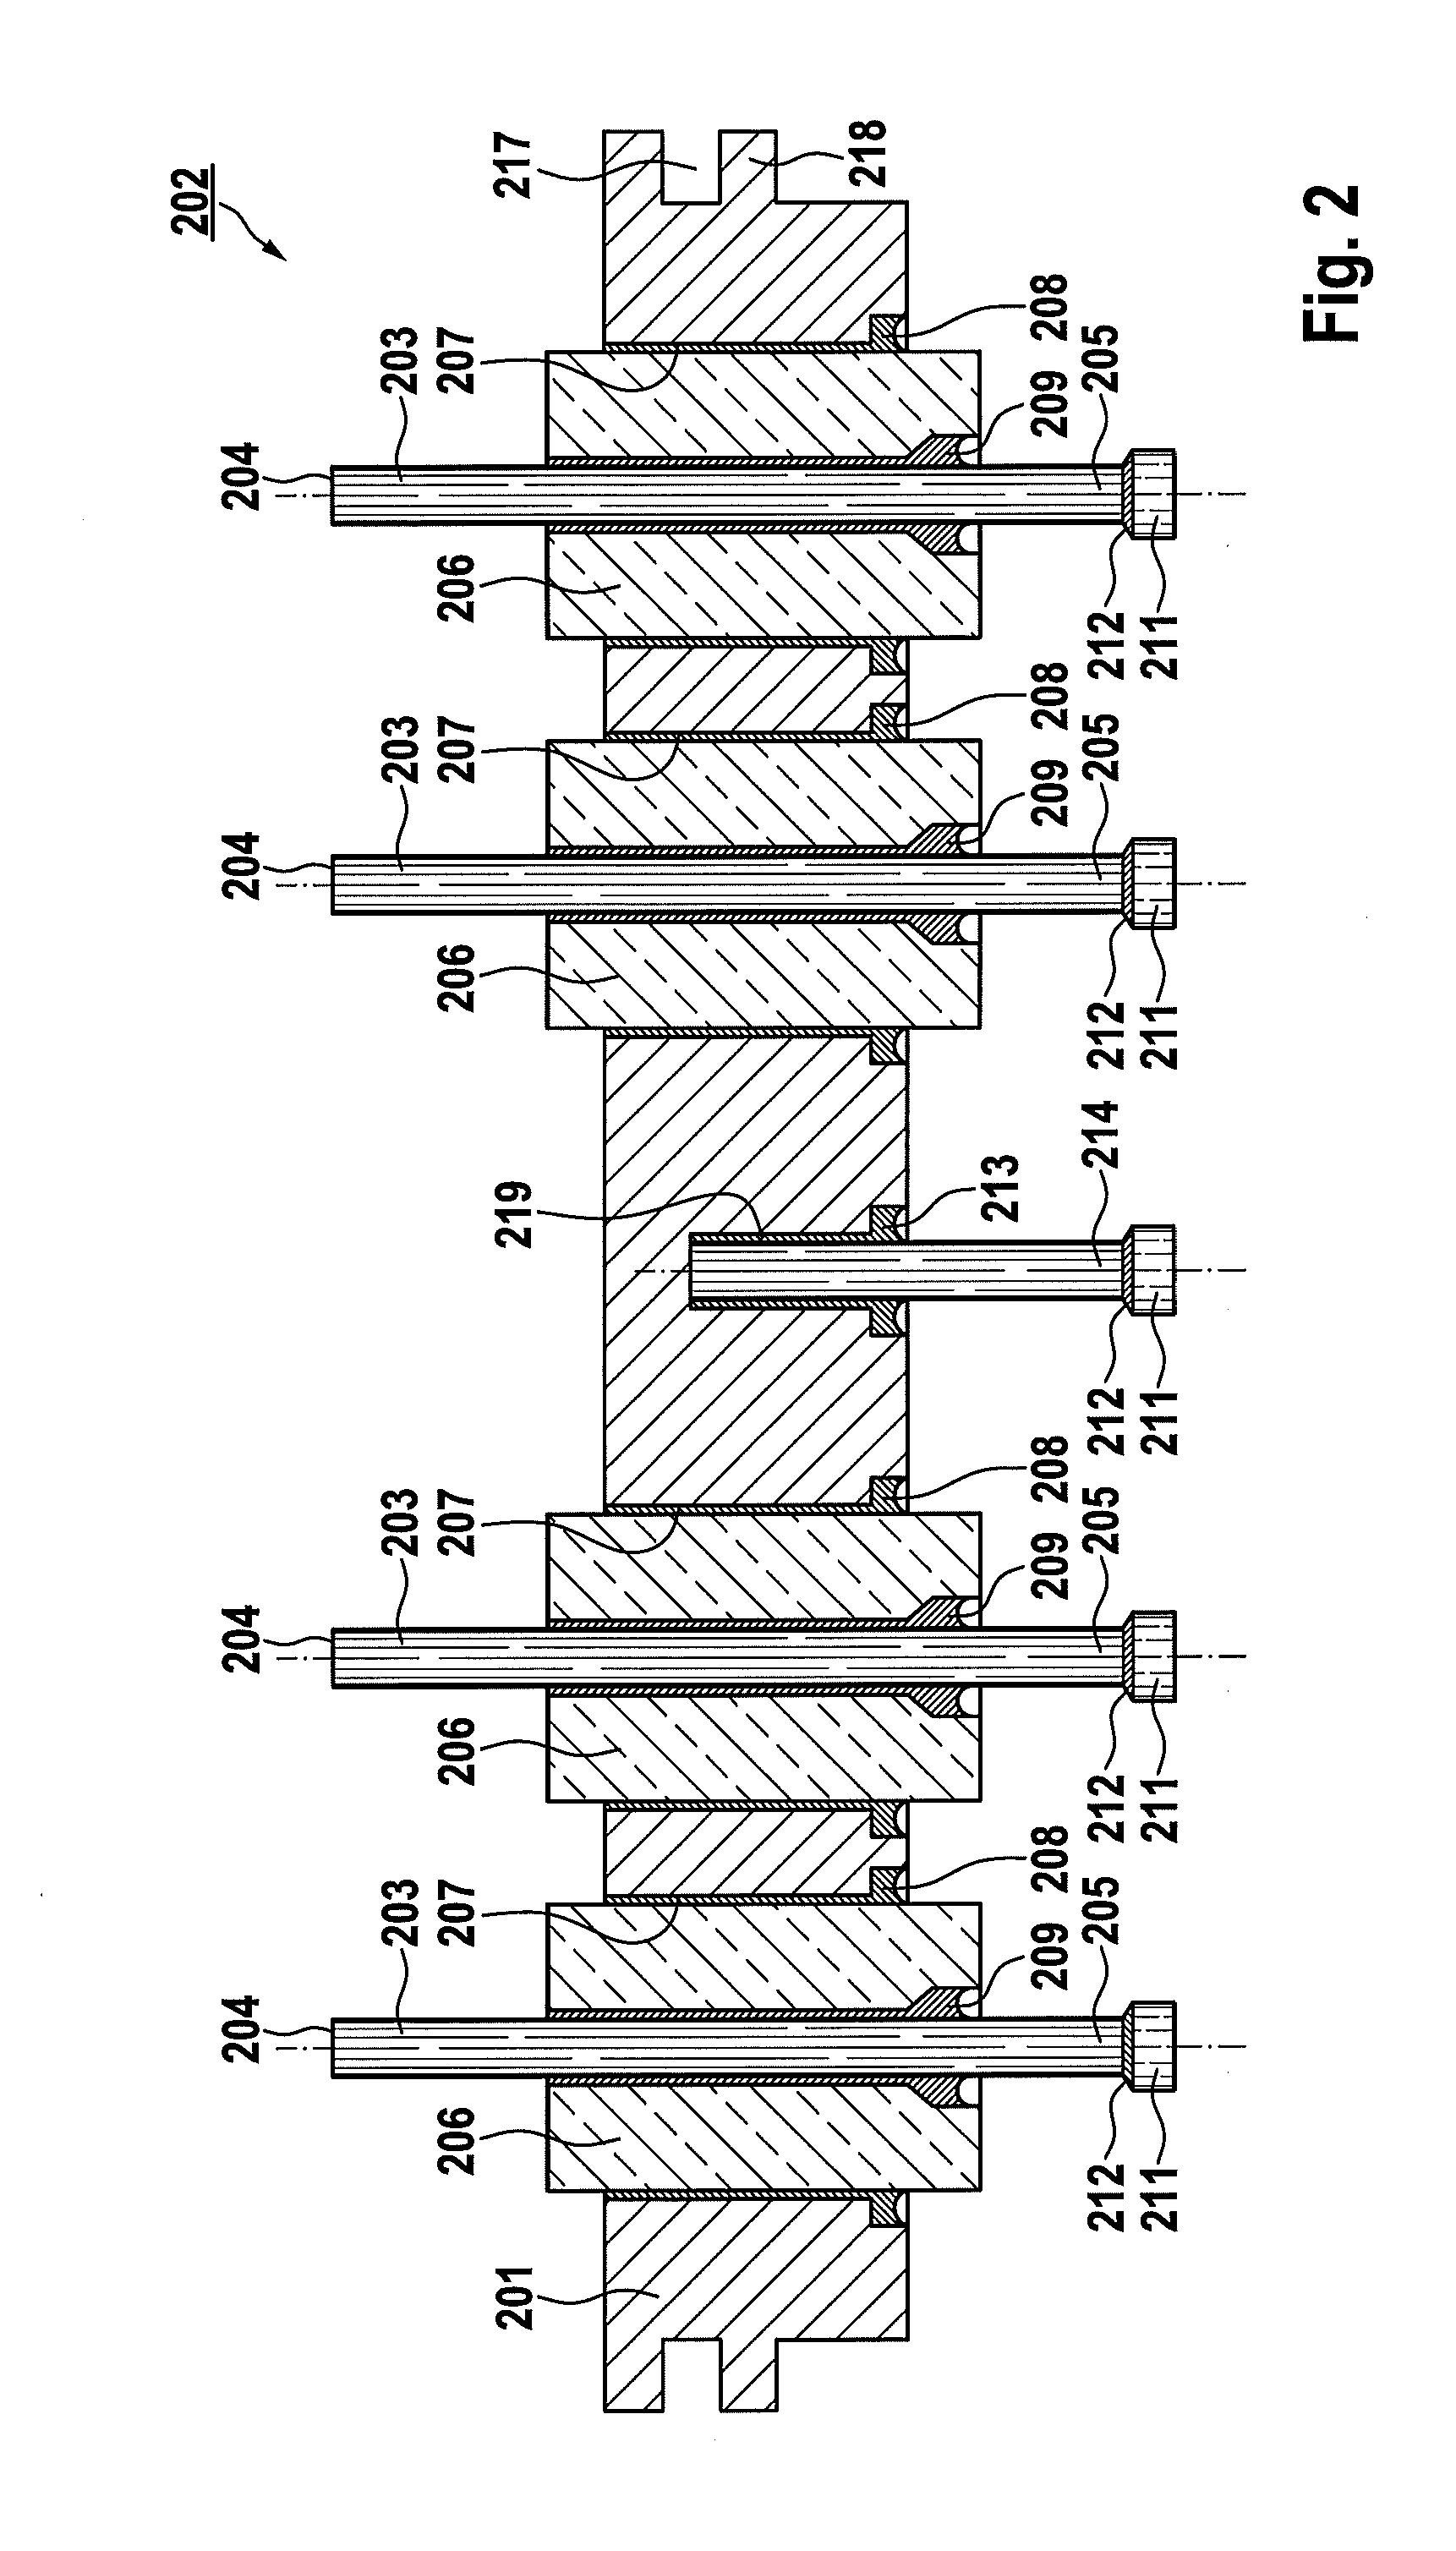 Electrical Feedthrough, in Particular for Medical Implants